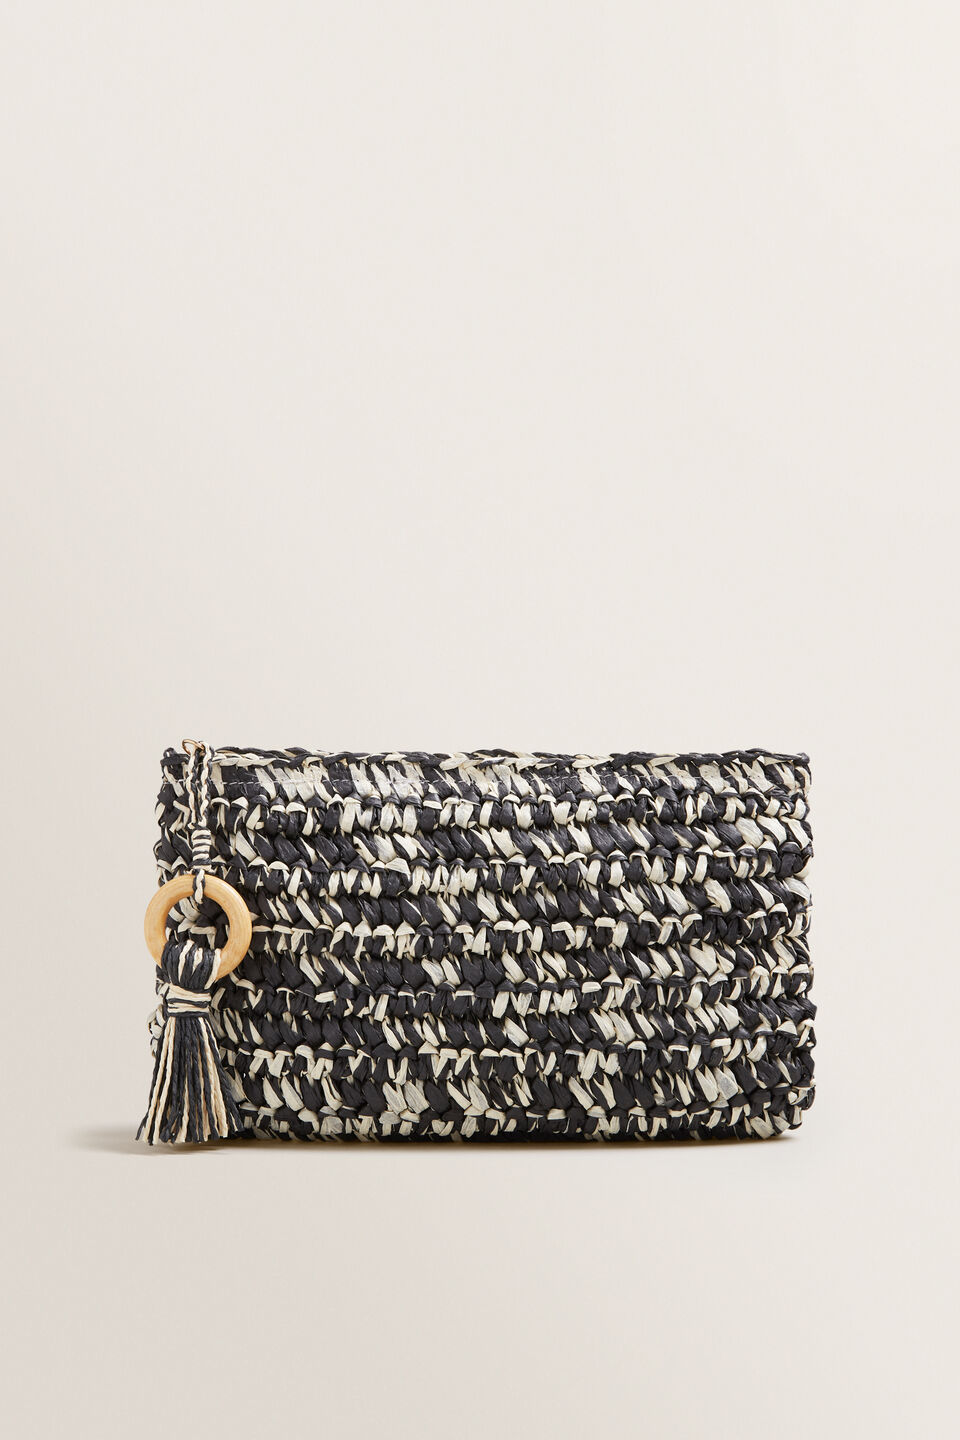 Two Tone Straw Pouch  